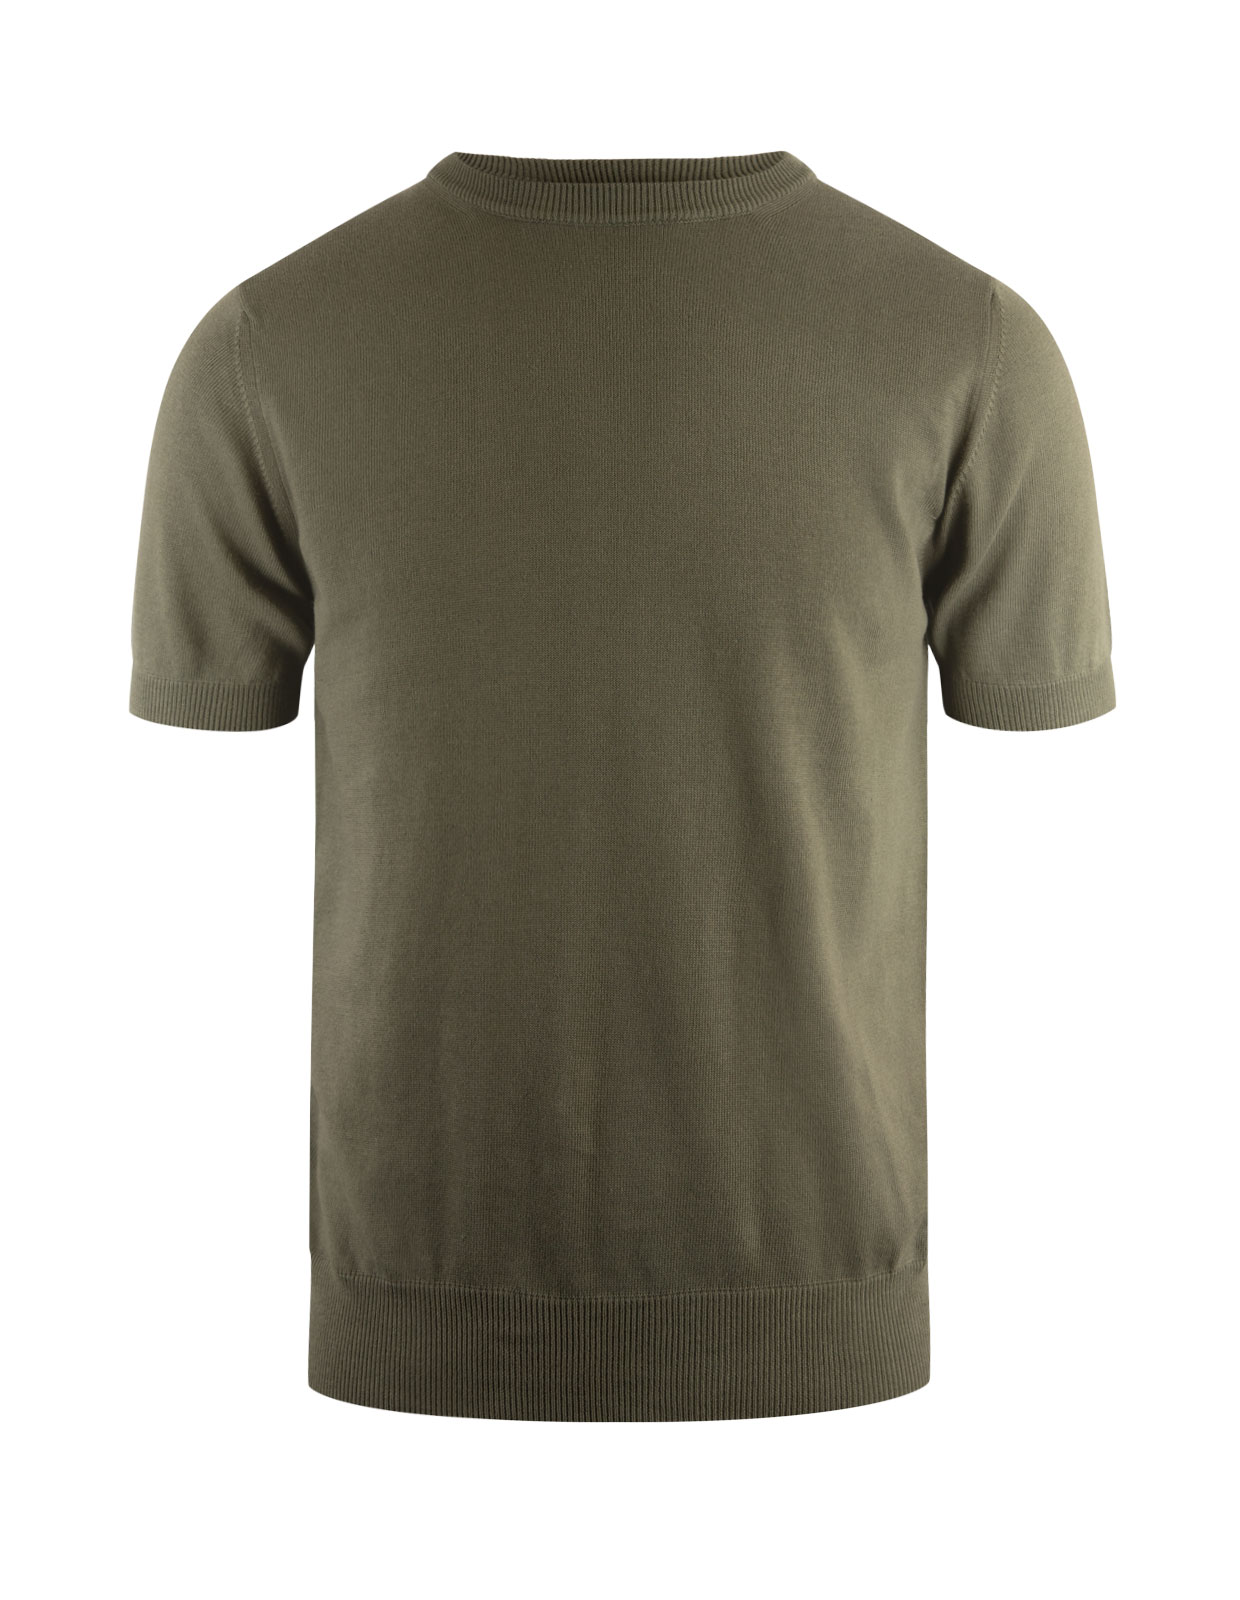 T-shirt Knitted Cotton Militay Green